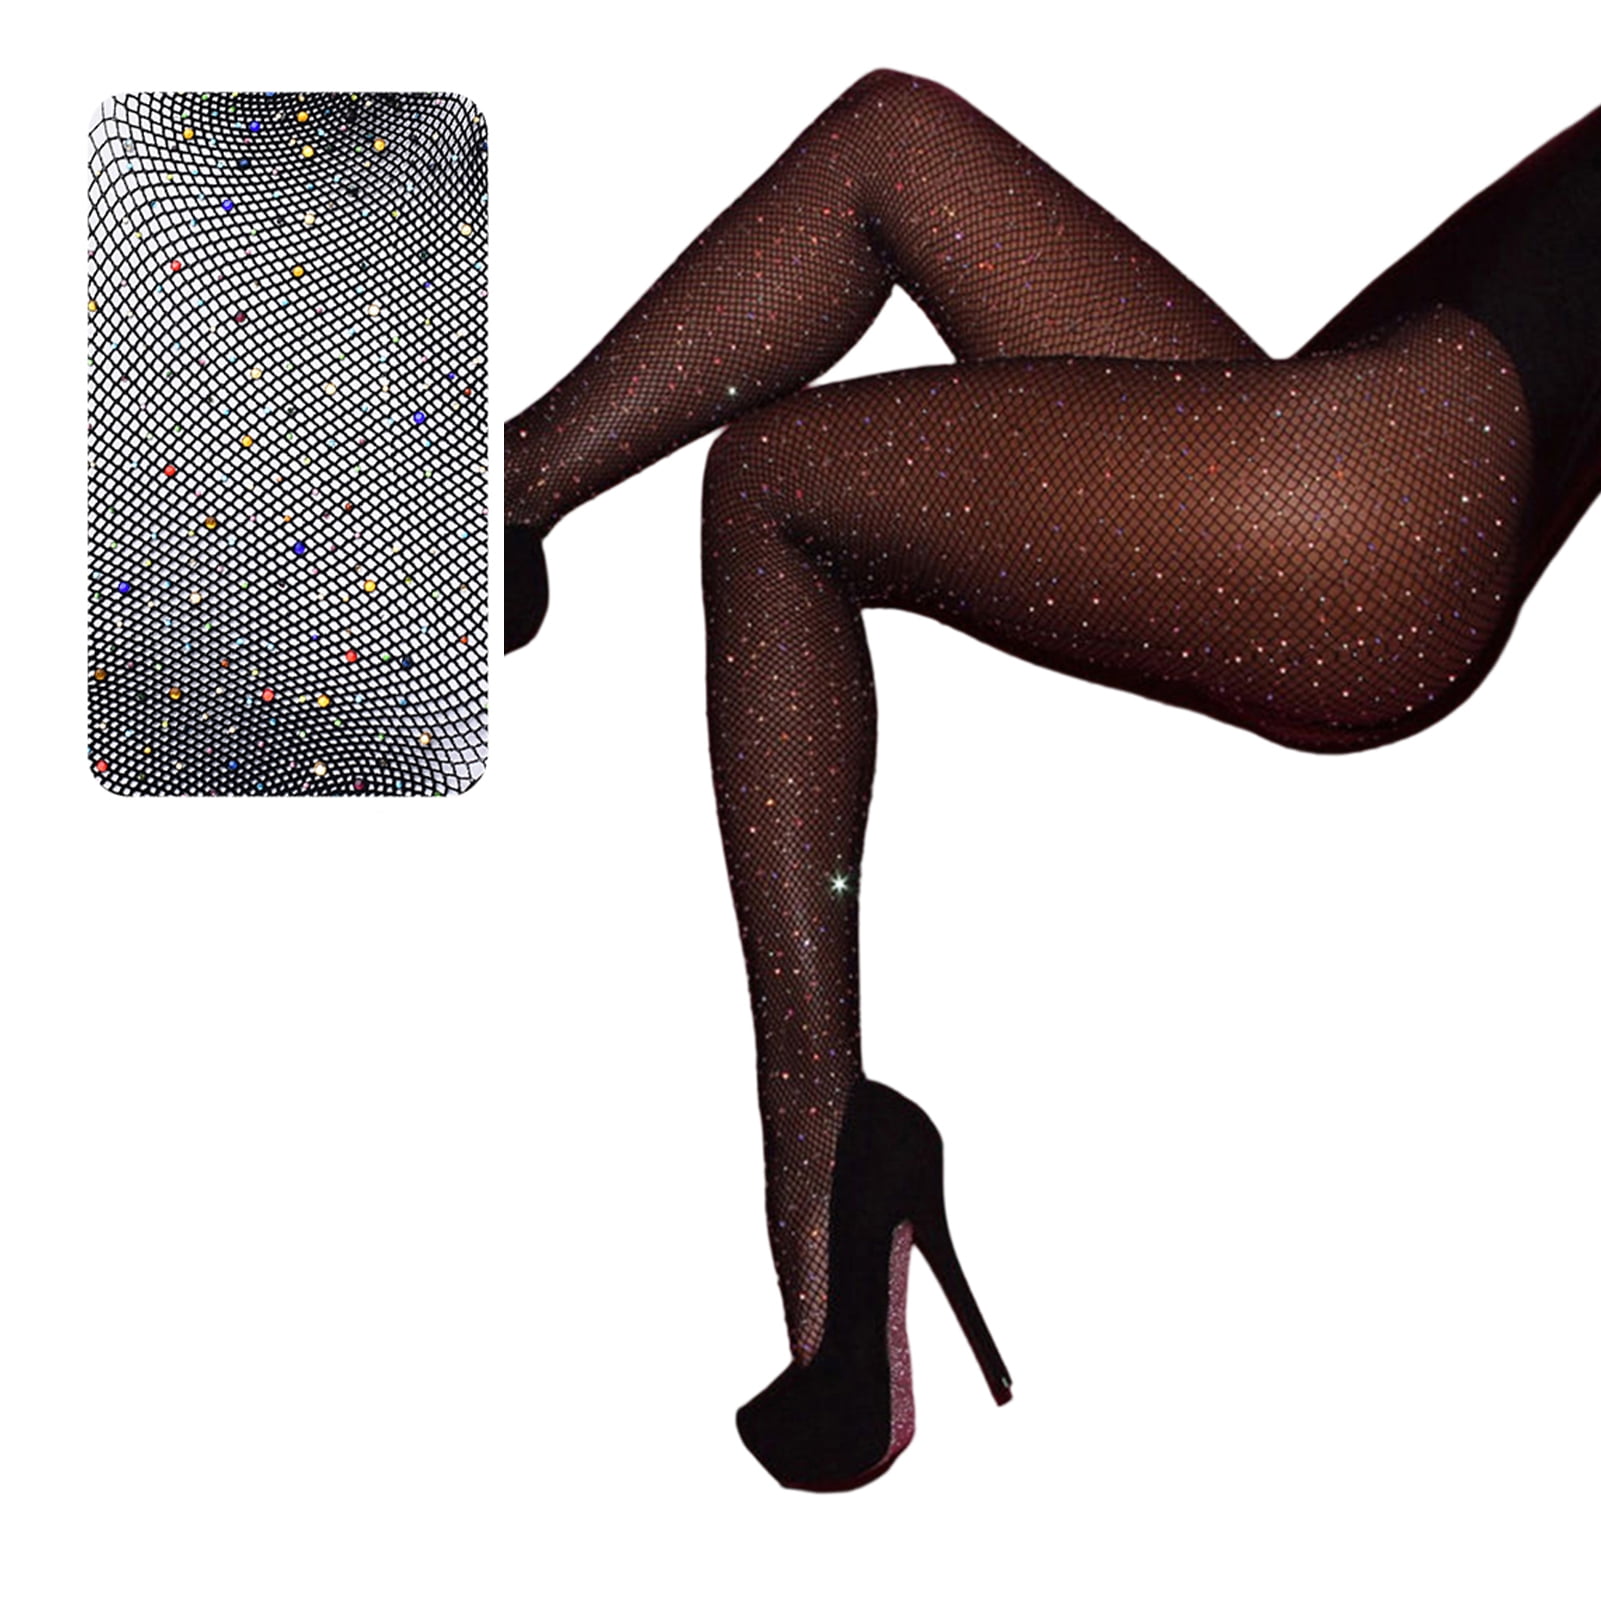 Kcocoo Women's Pattern Sheer Tights - Shiny Sheer High Waist Control Top  Pantyhose Fishnets Stockings with Reinforced Toes